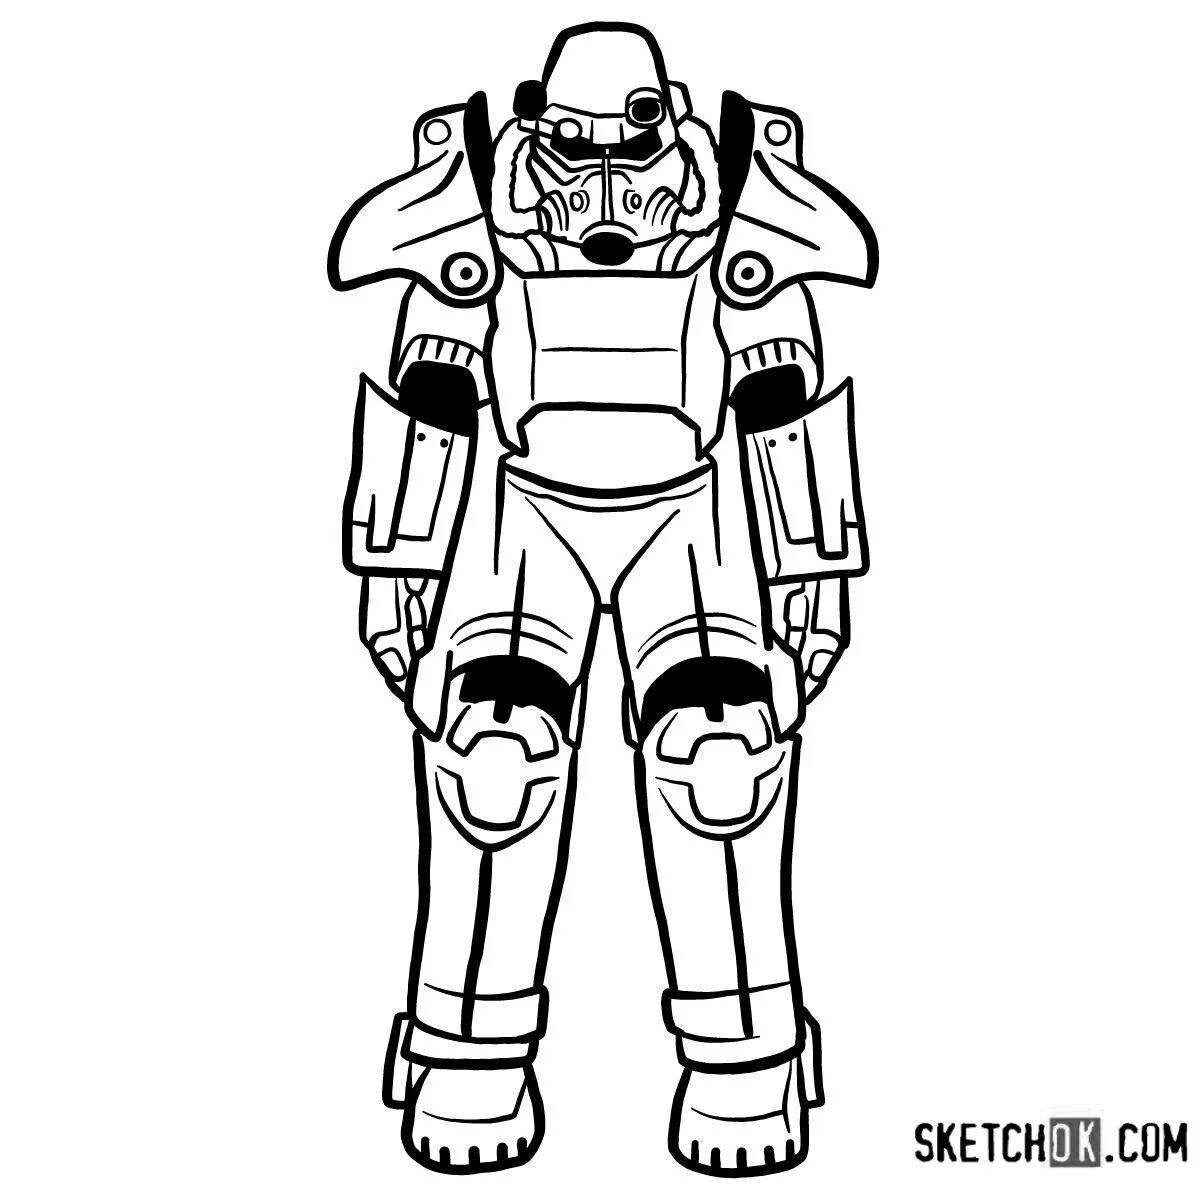 Awesome fallout 4 power armor coloring page